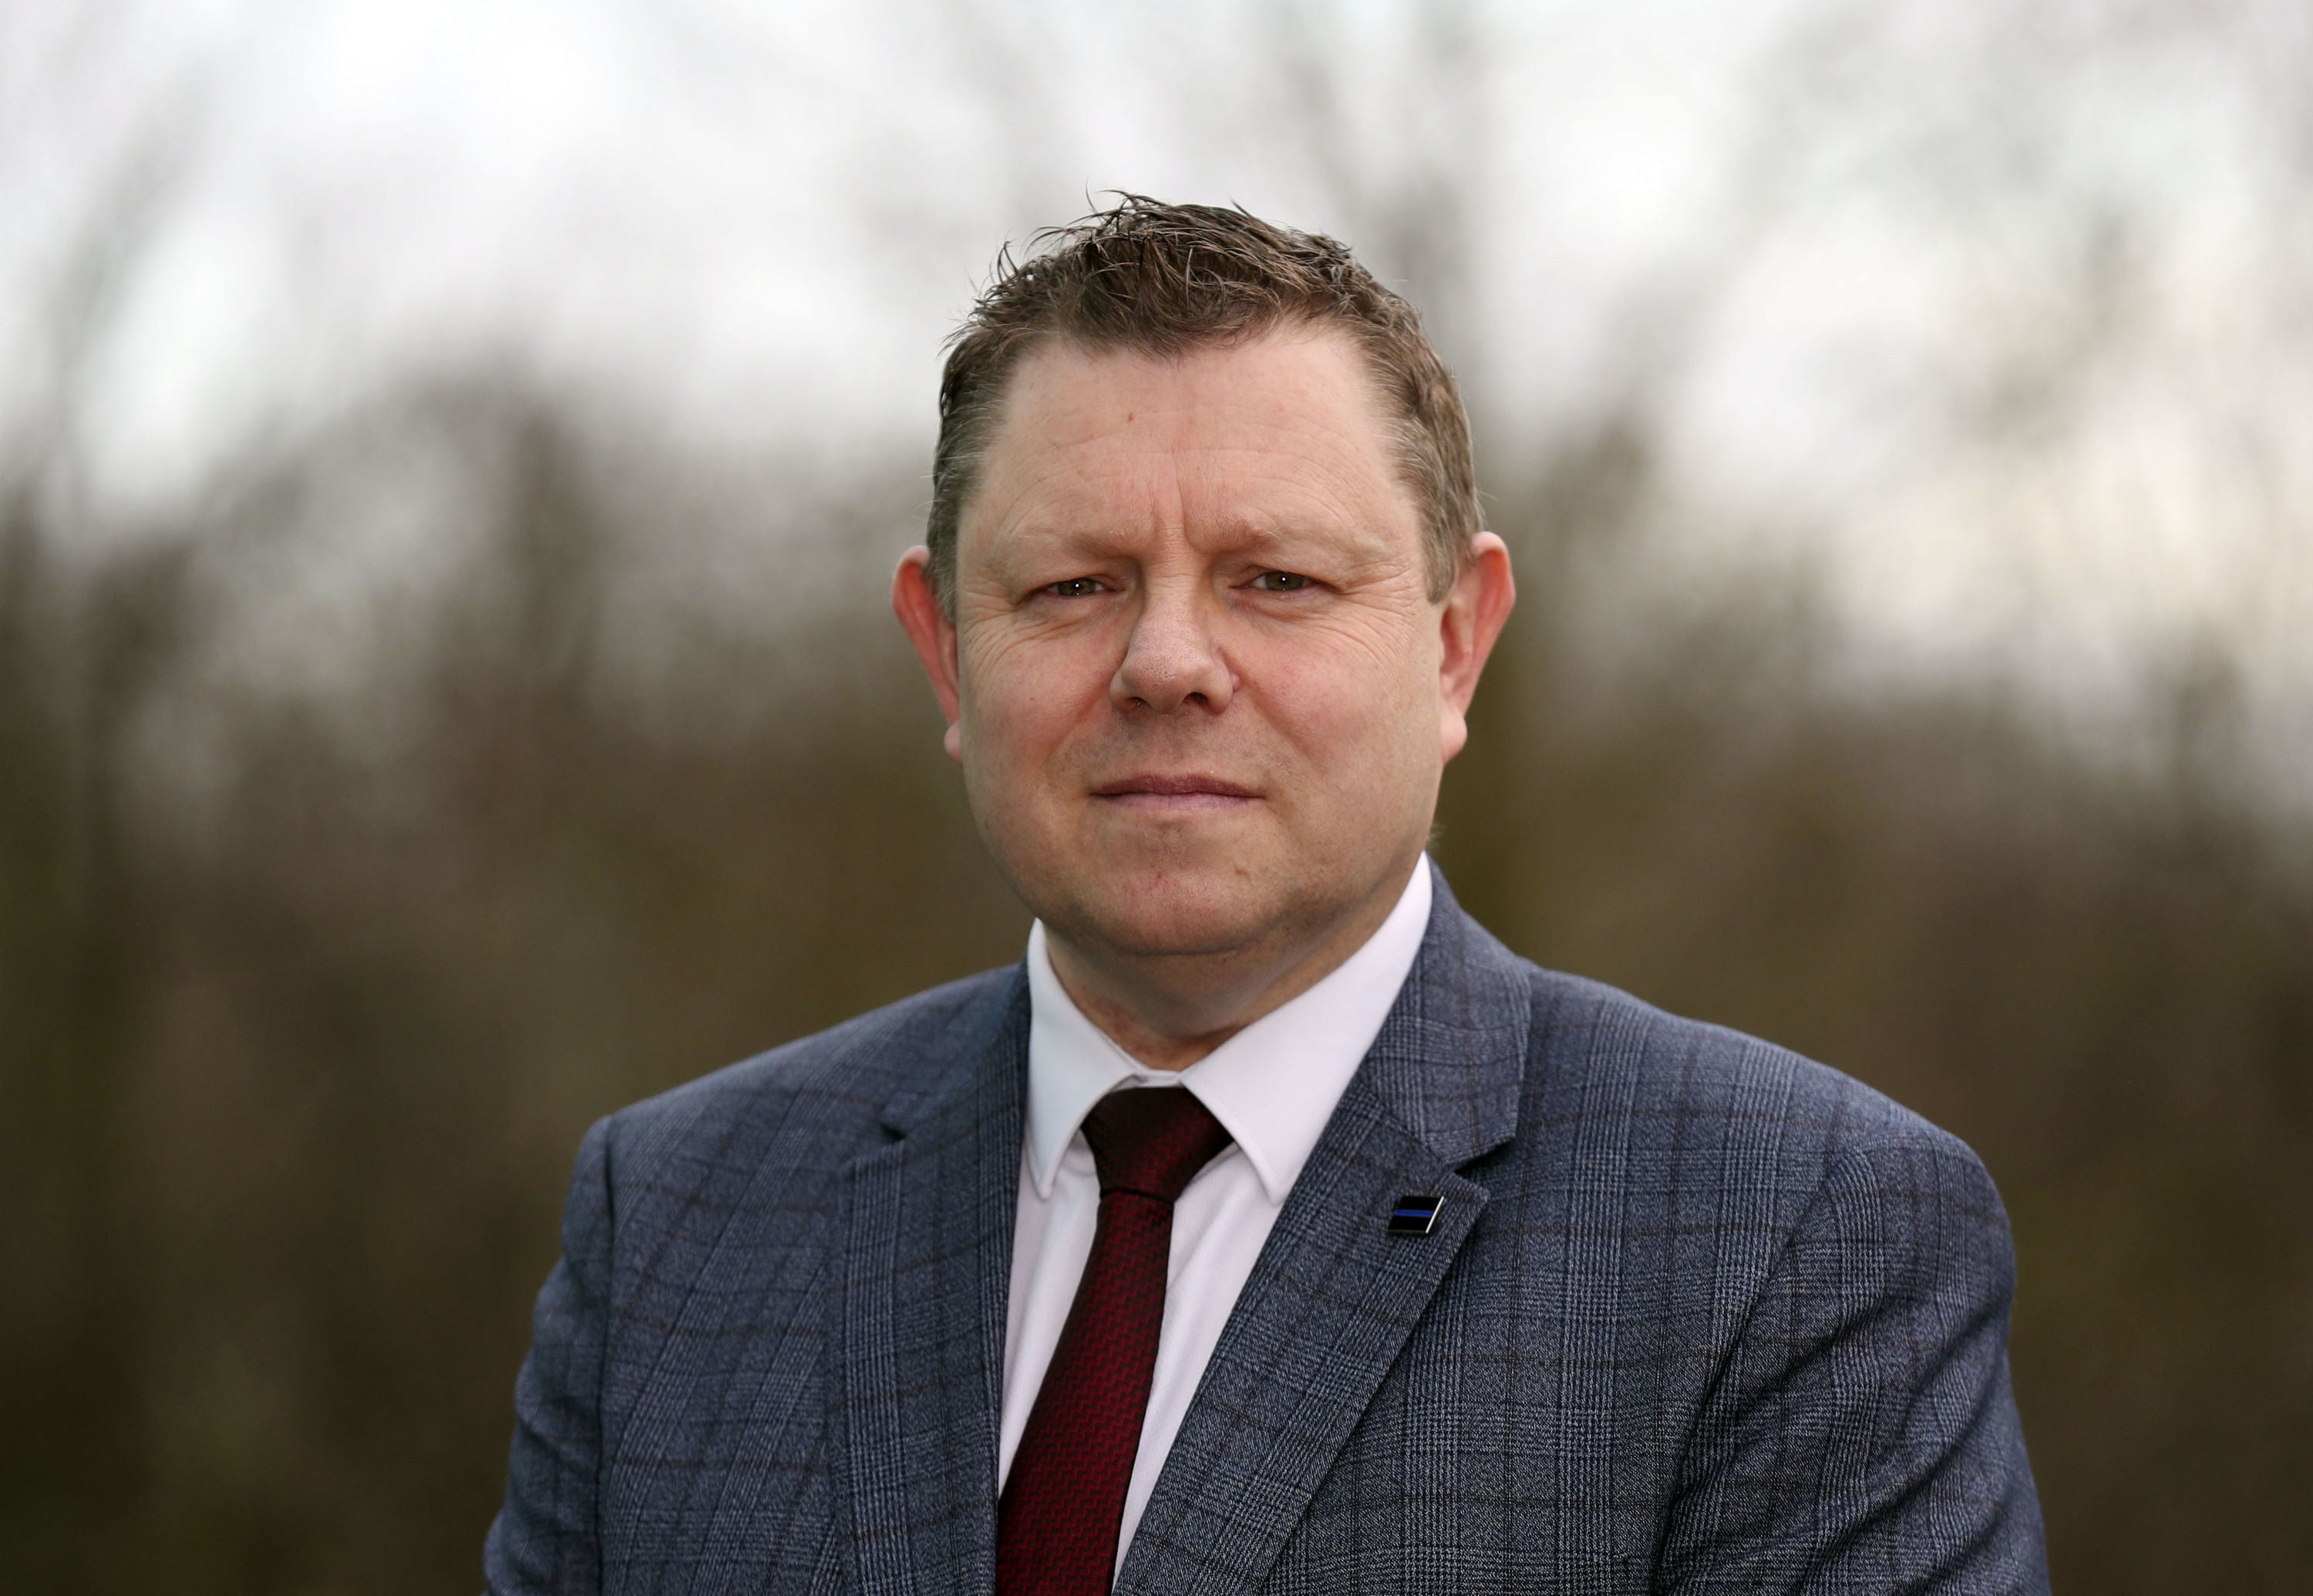 John Apter has been suspended by Hampshire Constabulary and is now the subject of a criminal investigation